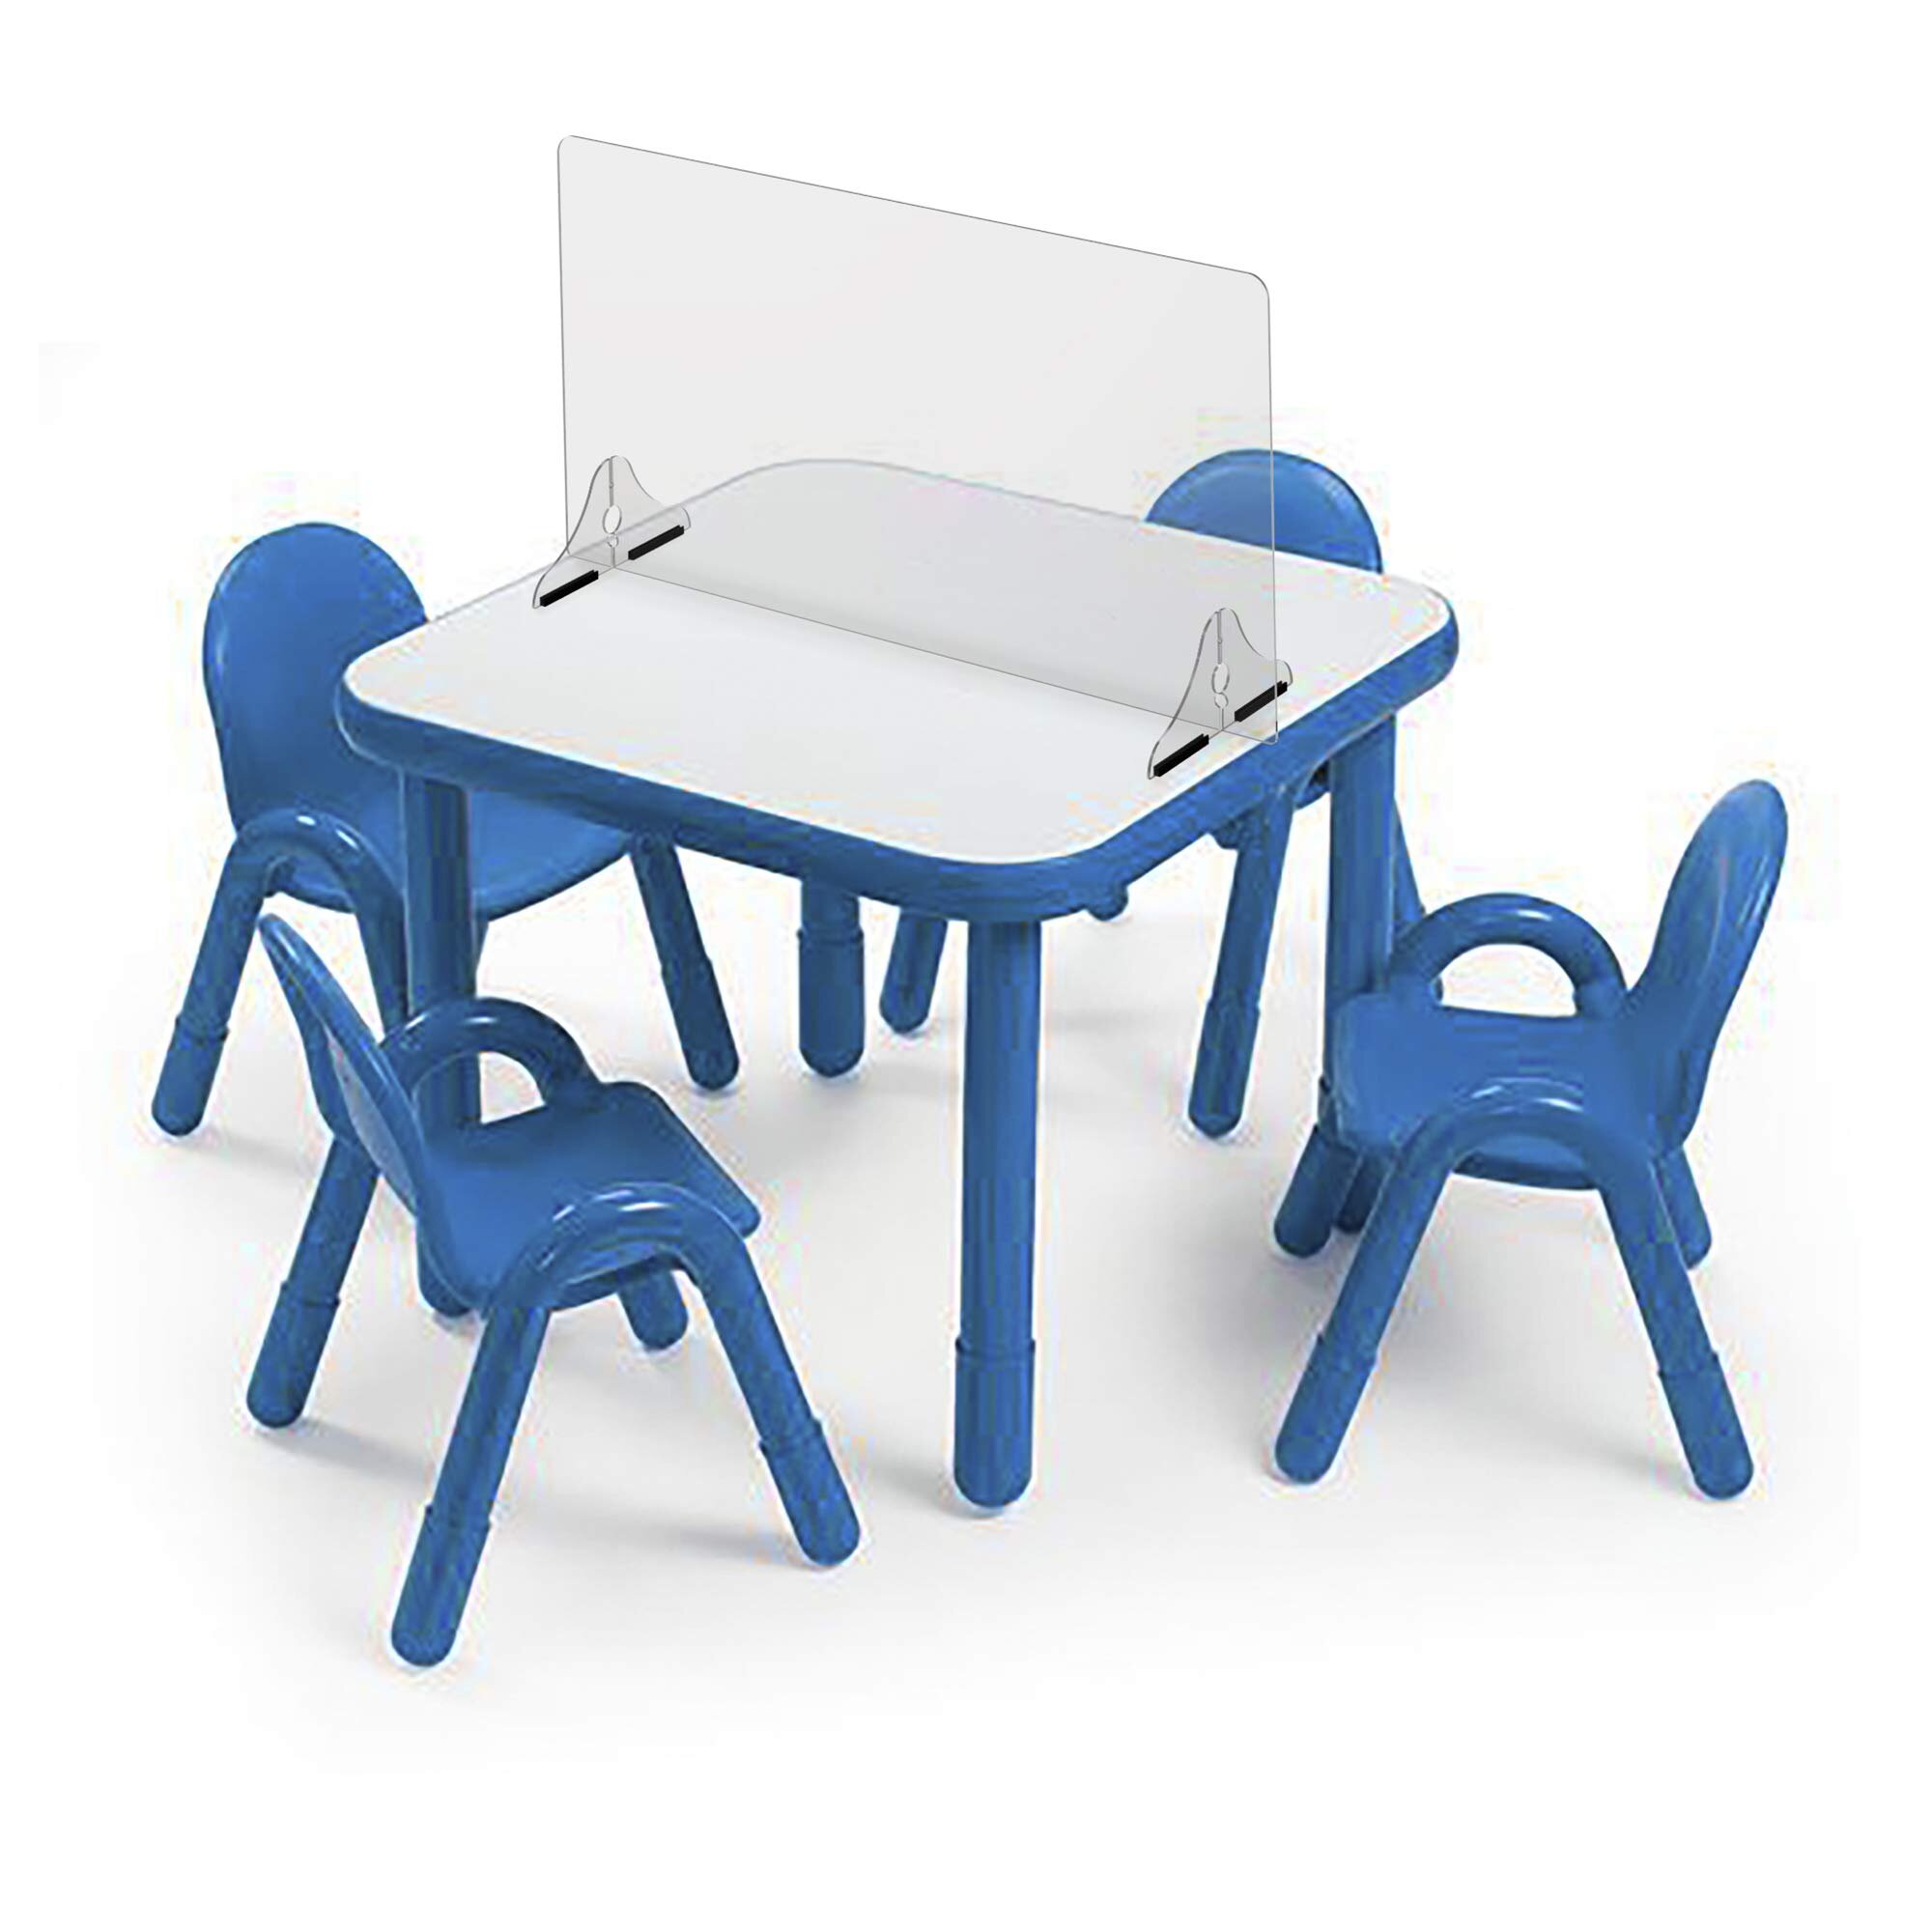 School Desks or Tables Sneeze Guard for Classroom Social Distancing Three Sides. Crystal Clear 